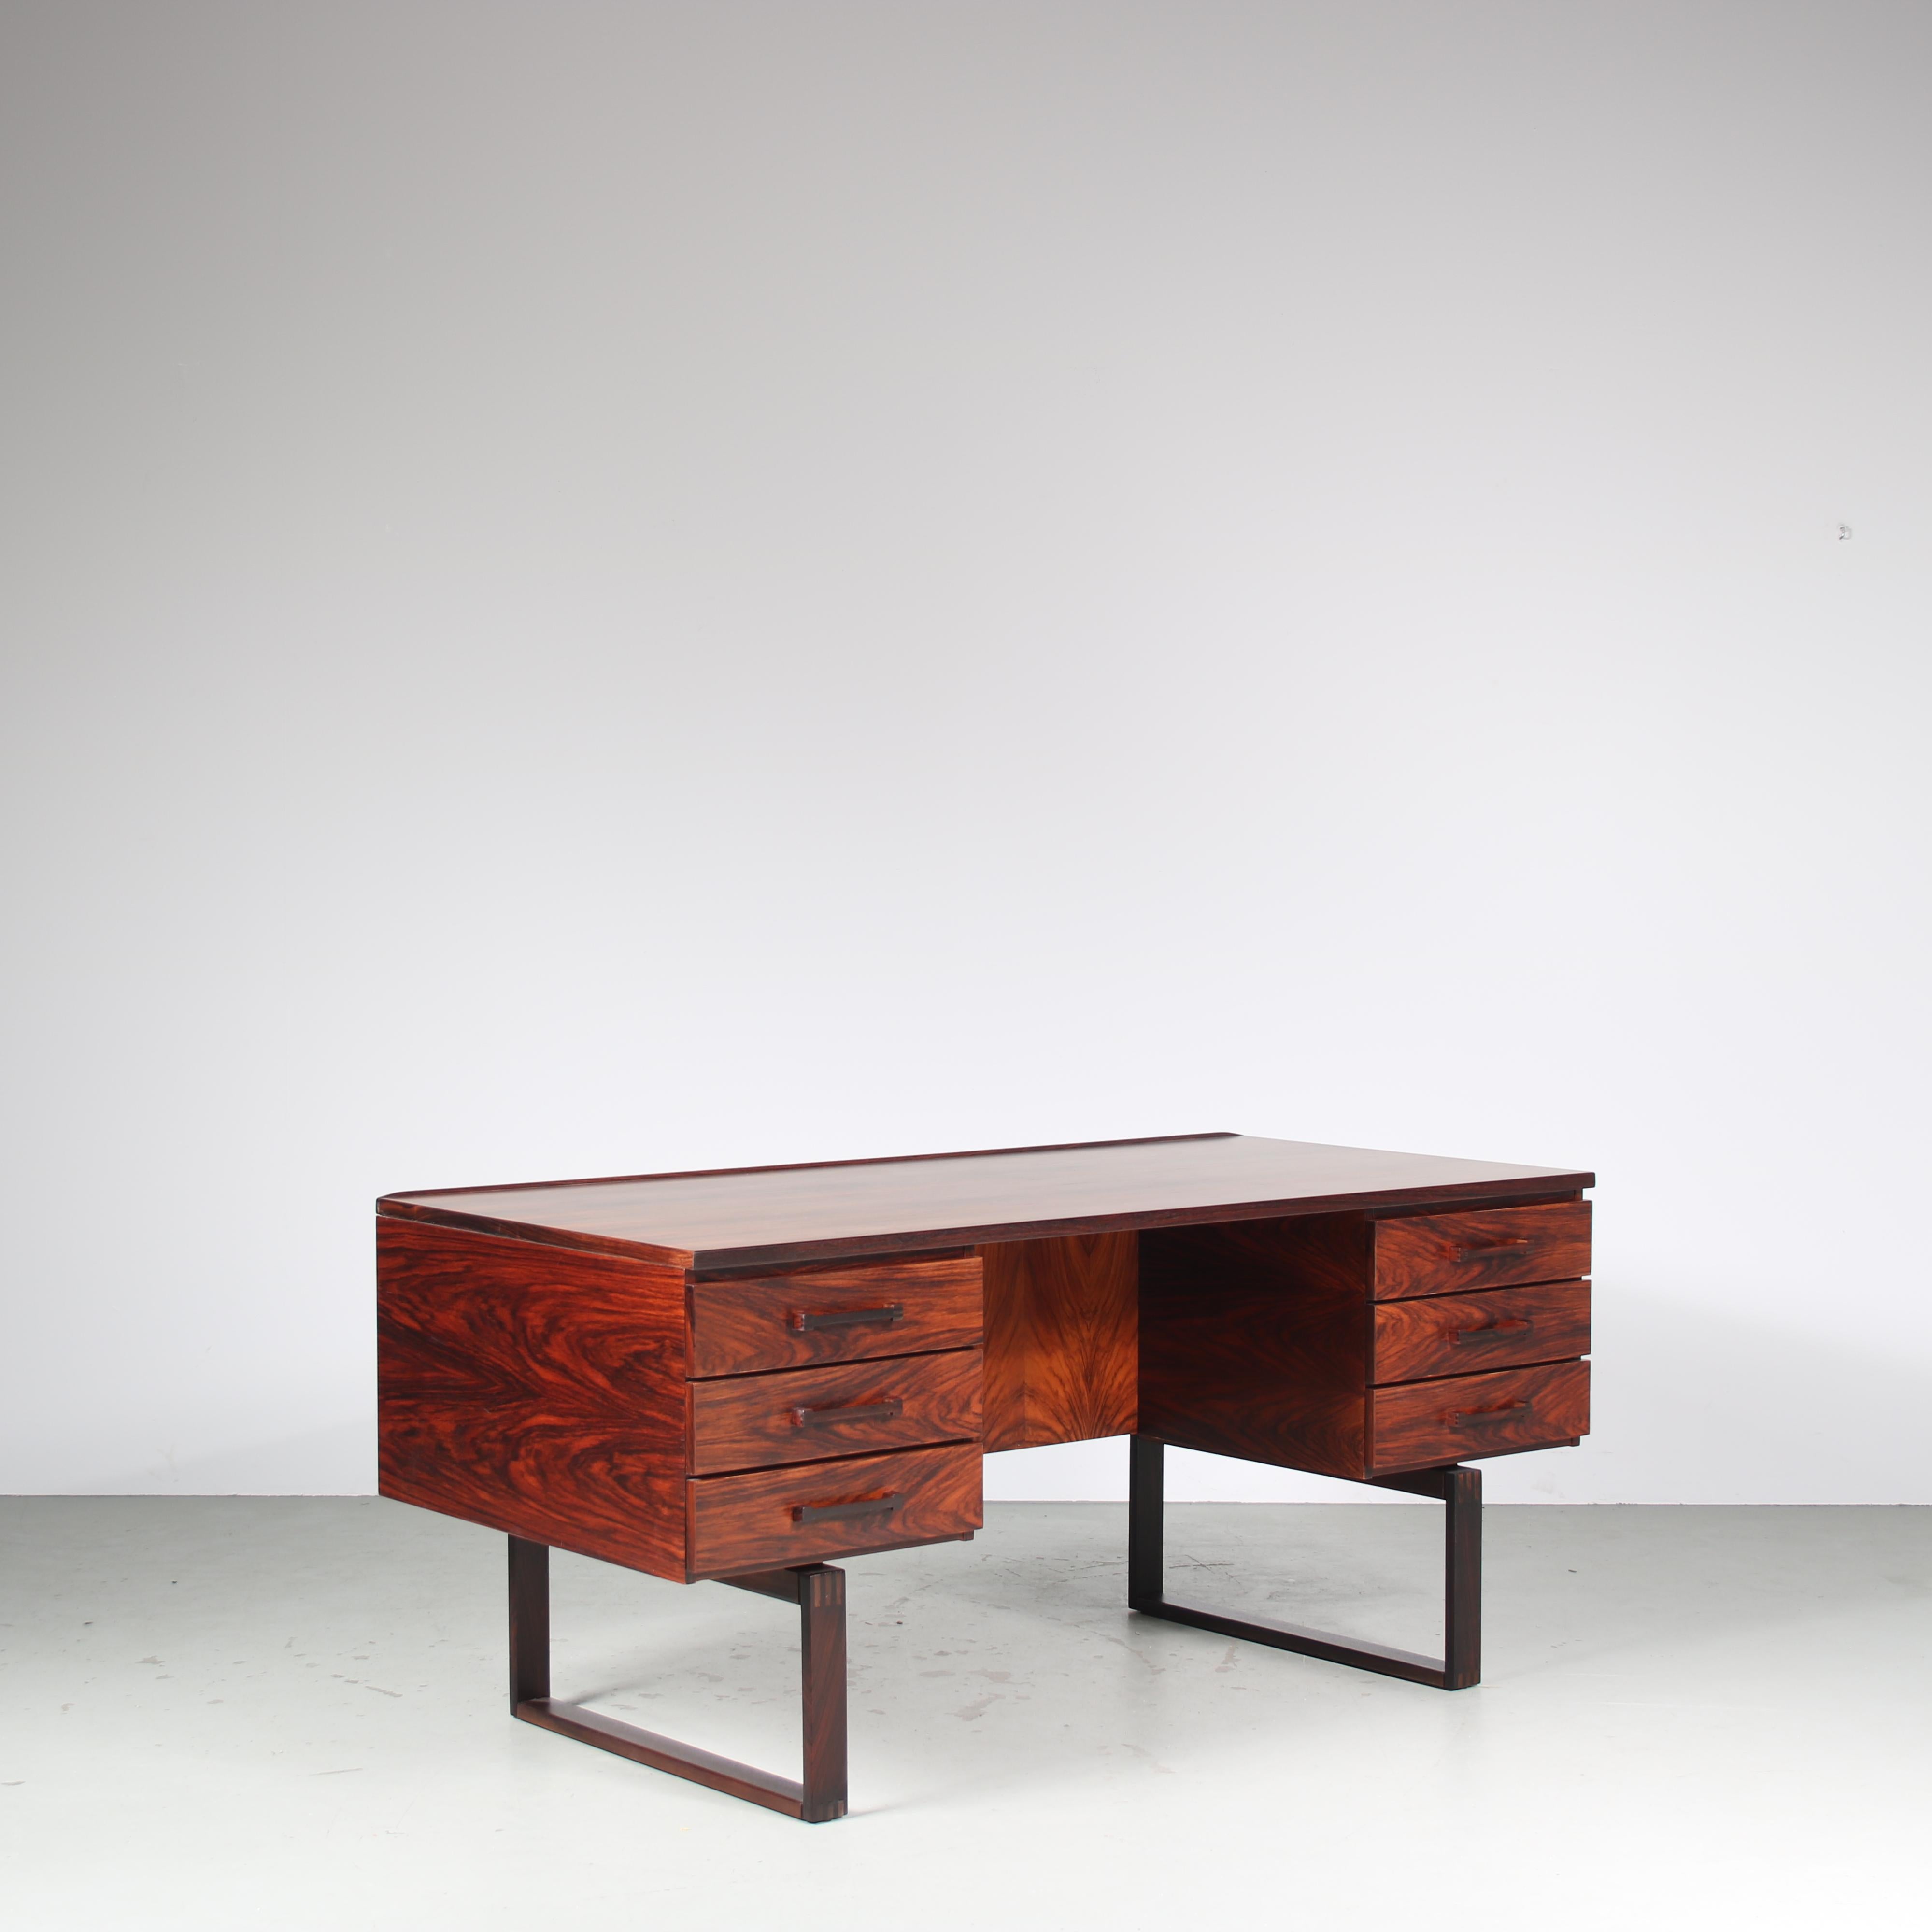 A fantastic desk designed by Torben Valeur & Henning Jensen, manufactured by Munch Mobler in Denmark around 1960.

This impressive desk is made of the highest quality tropical hardwood in a truly beautiful deep brown colour. Standing on two